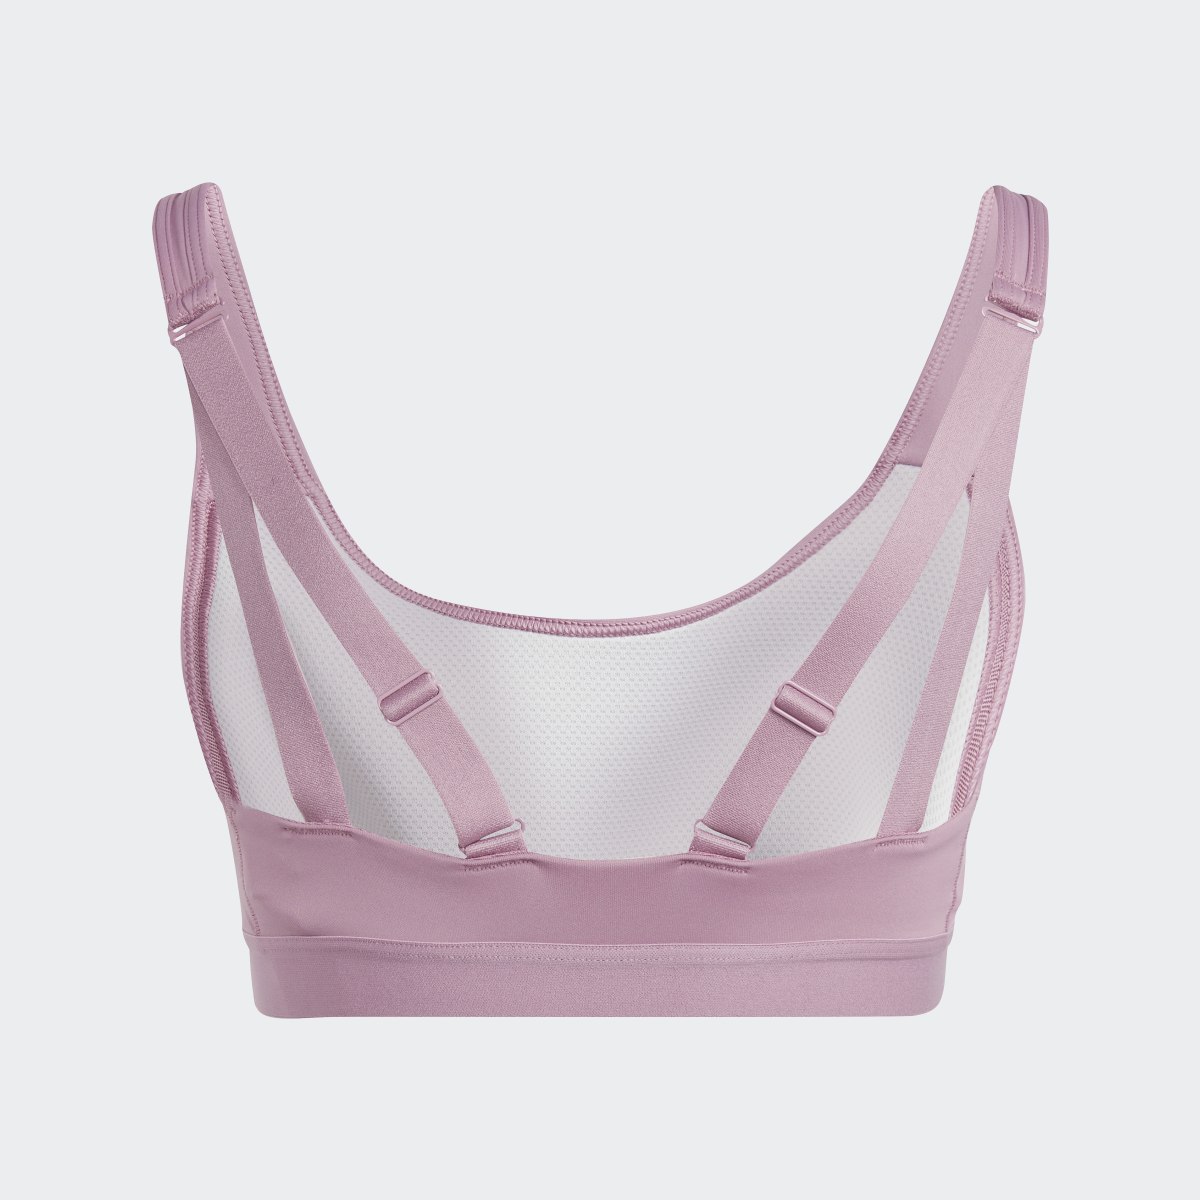 Adidas TLRD Move Training High-Support Bra. 6